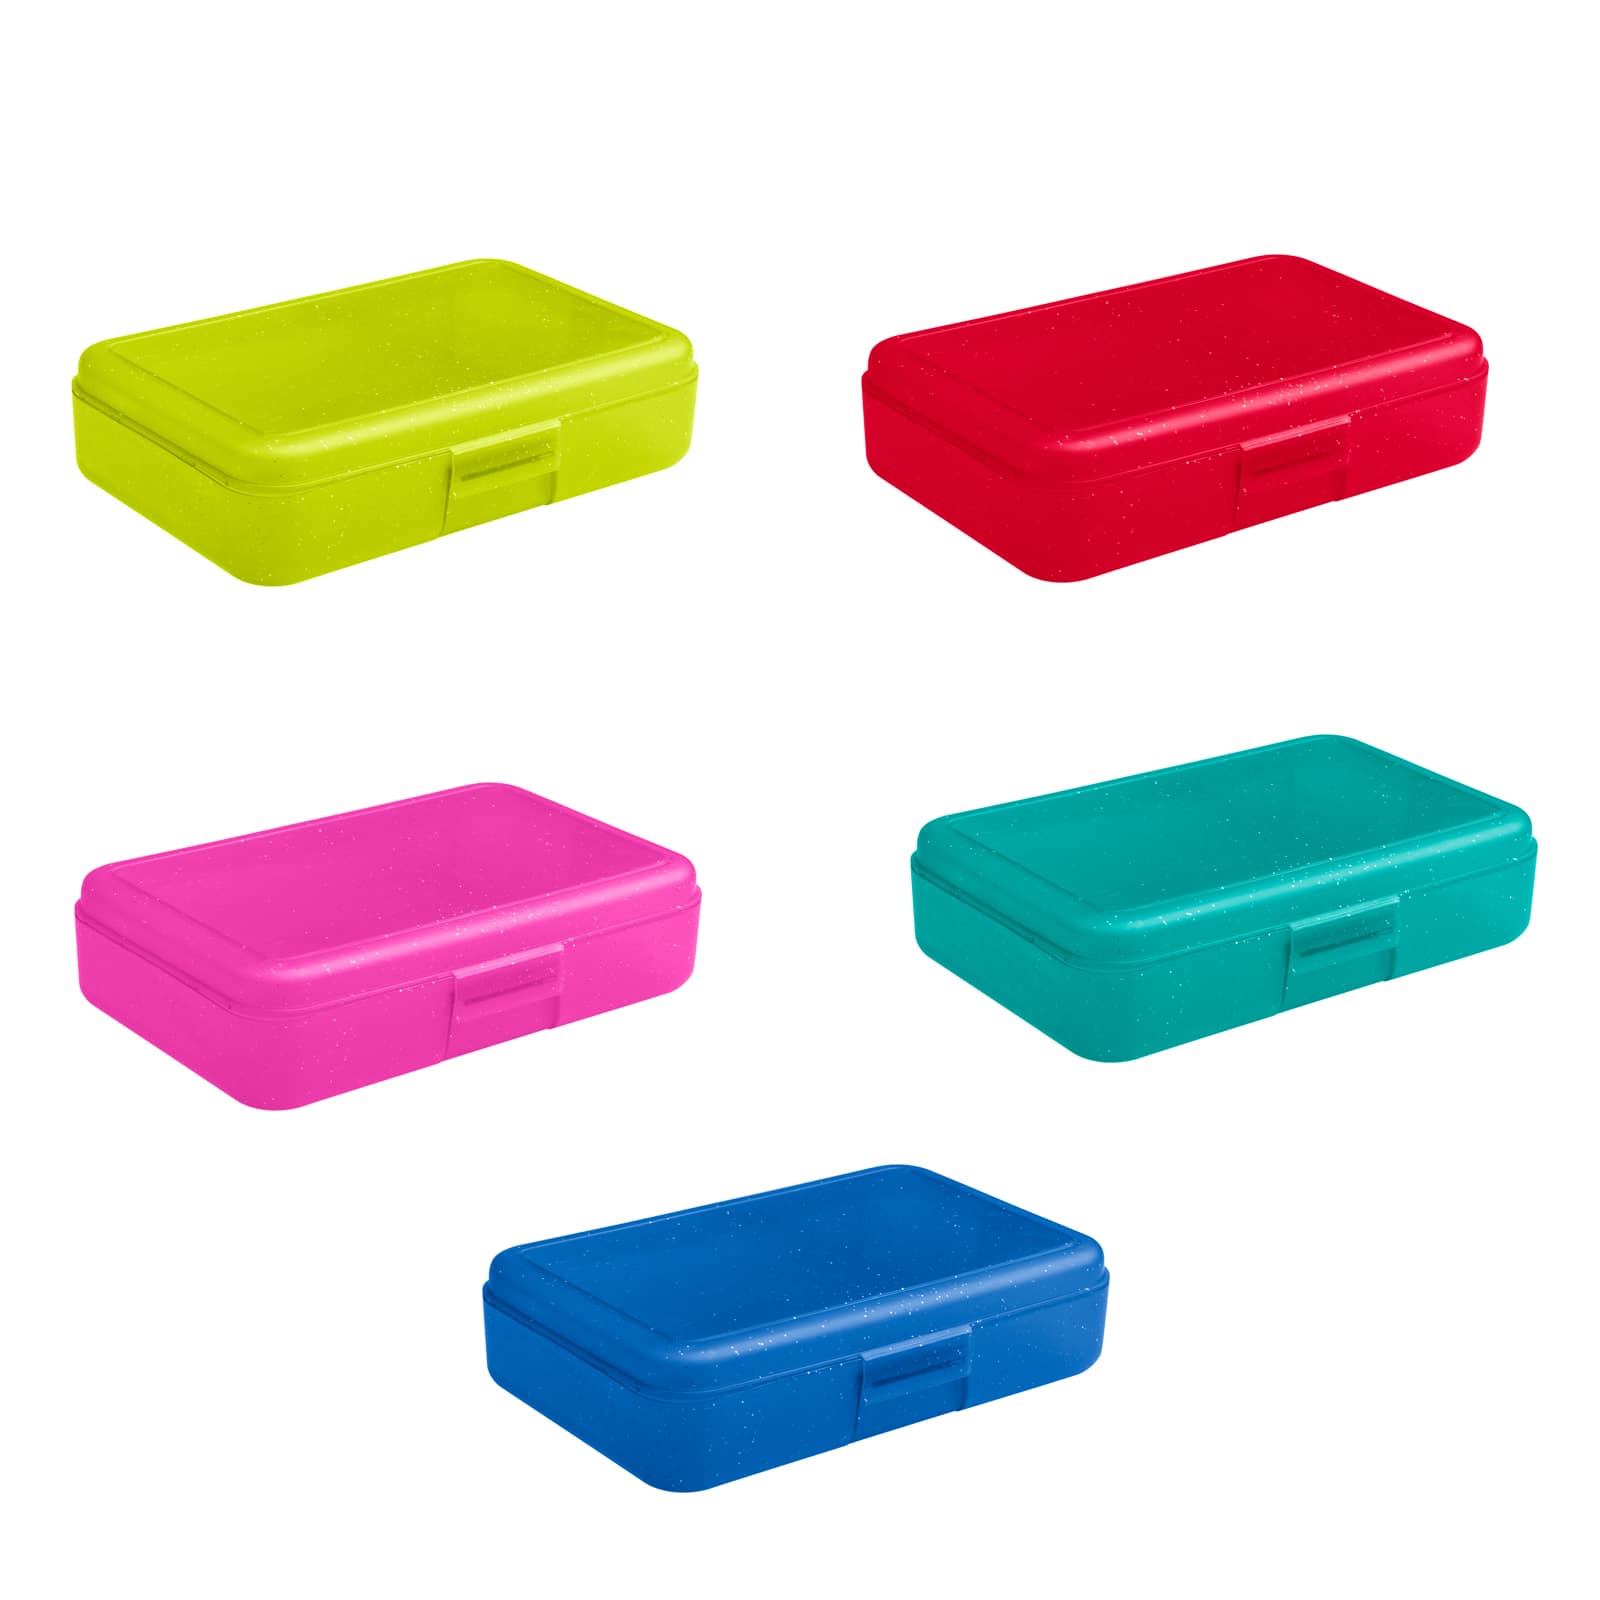 Assorted Pencil Box By Creatology? | Michaels�